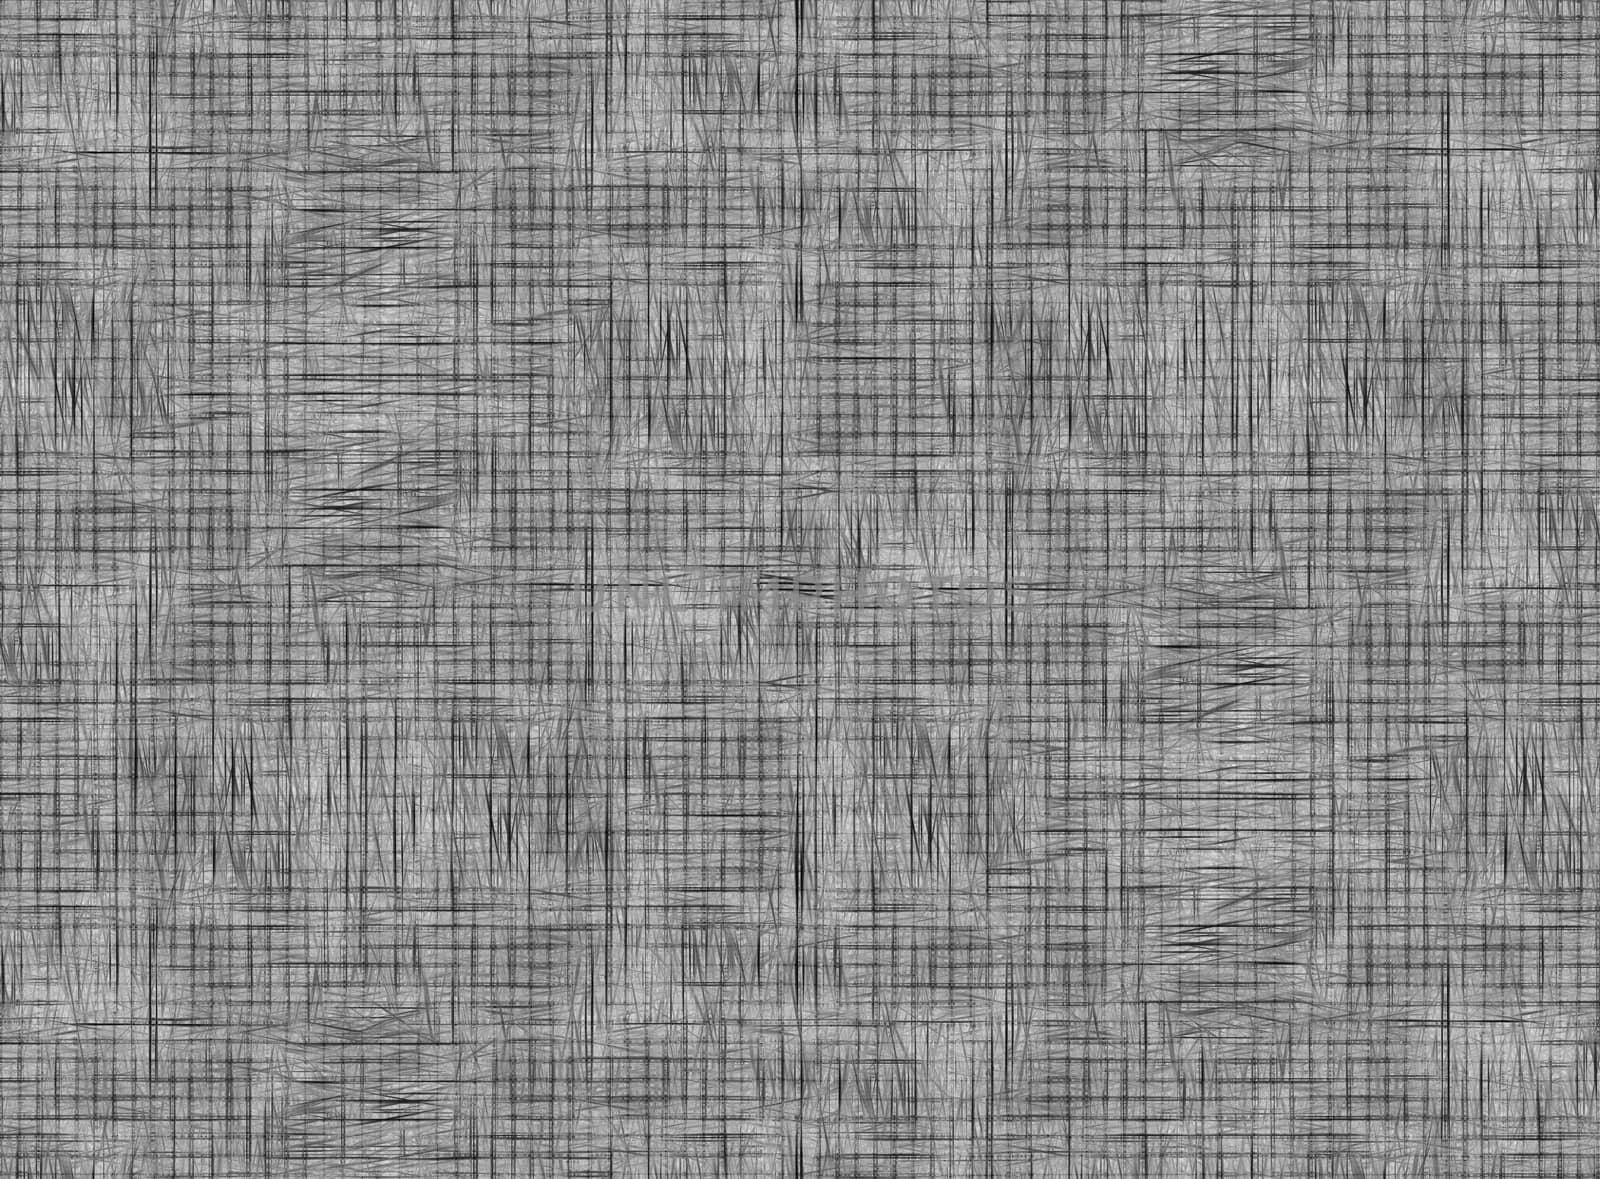 Abstract black and white background of gray tones with fine texture